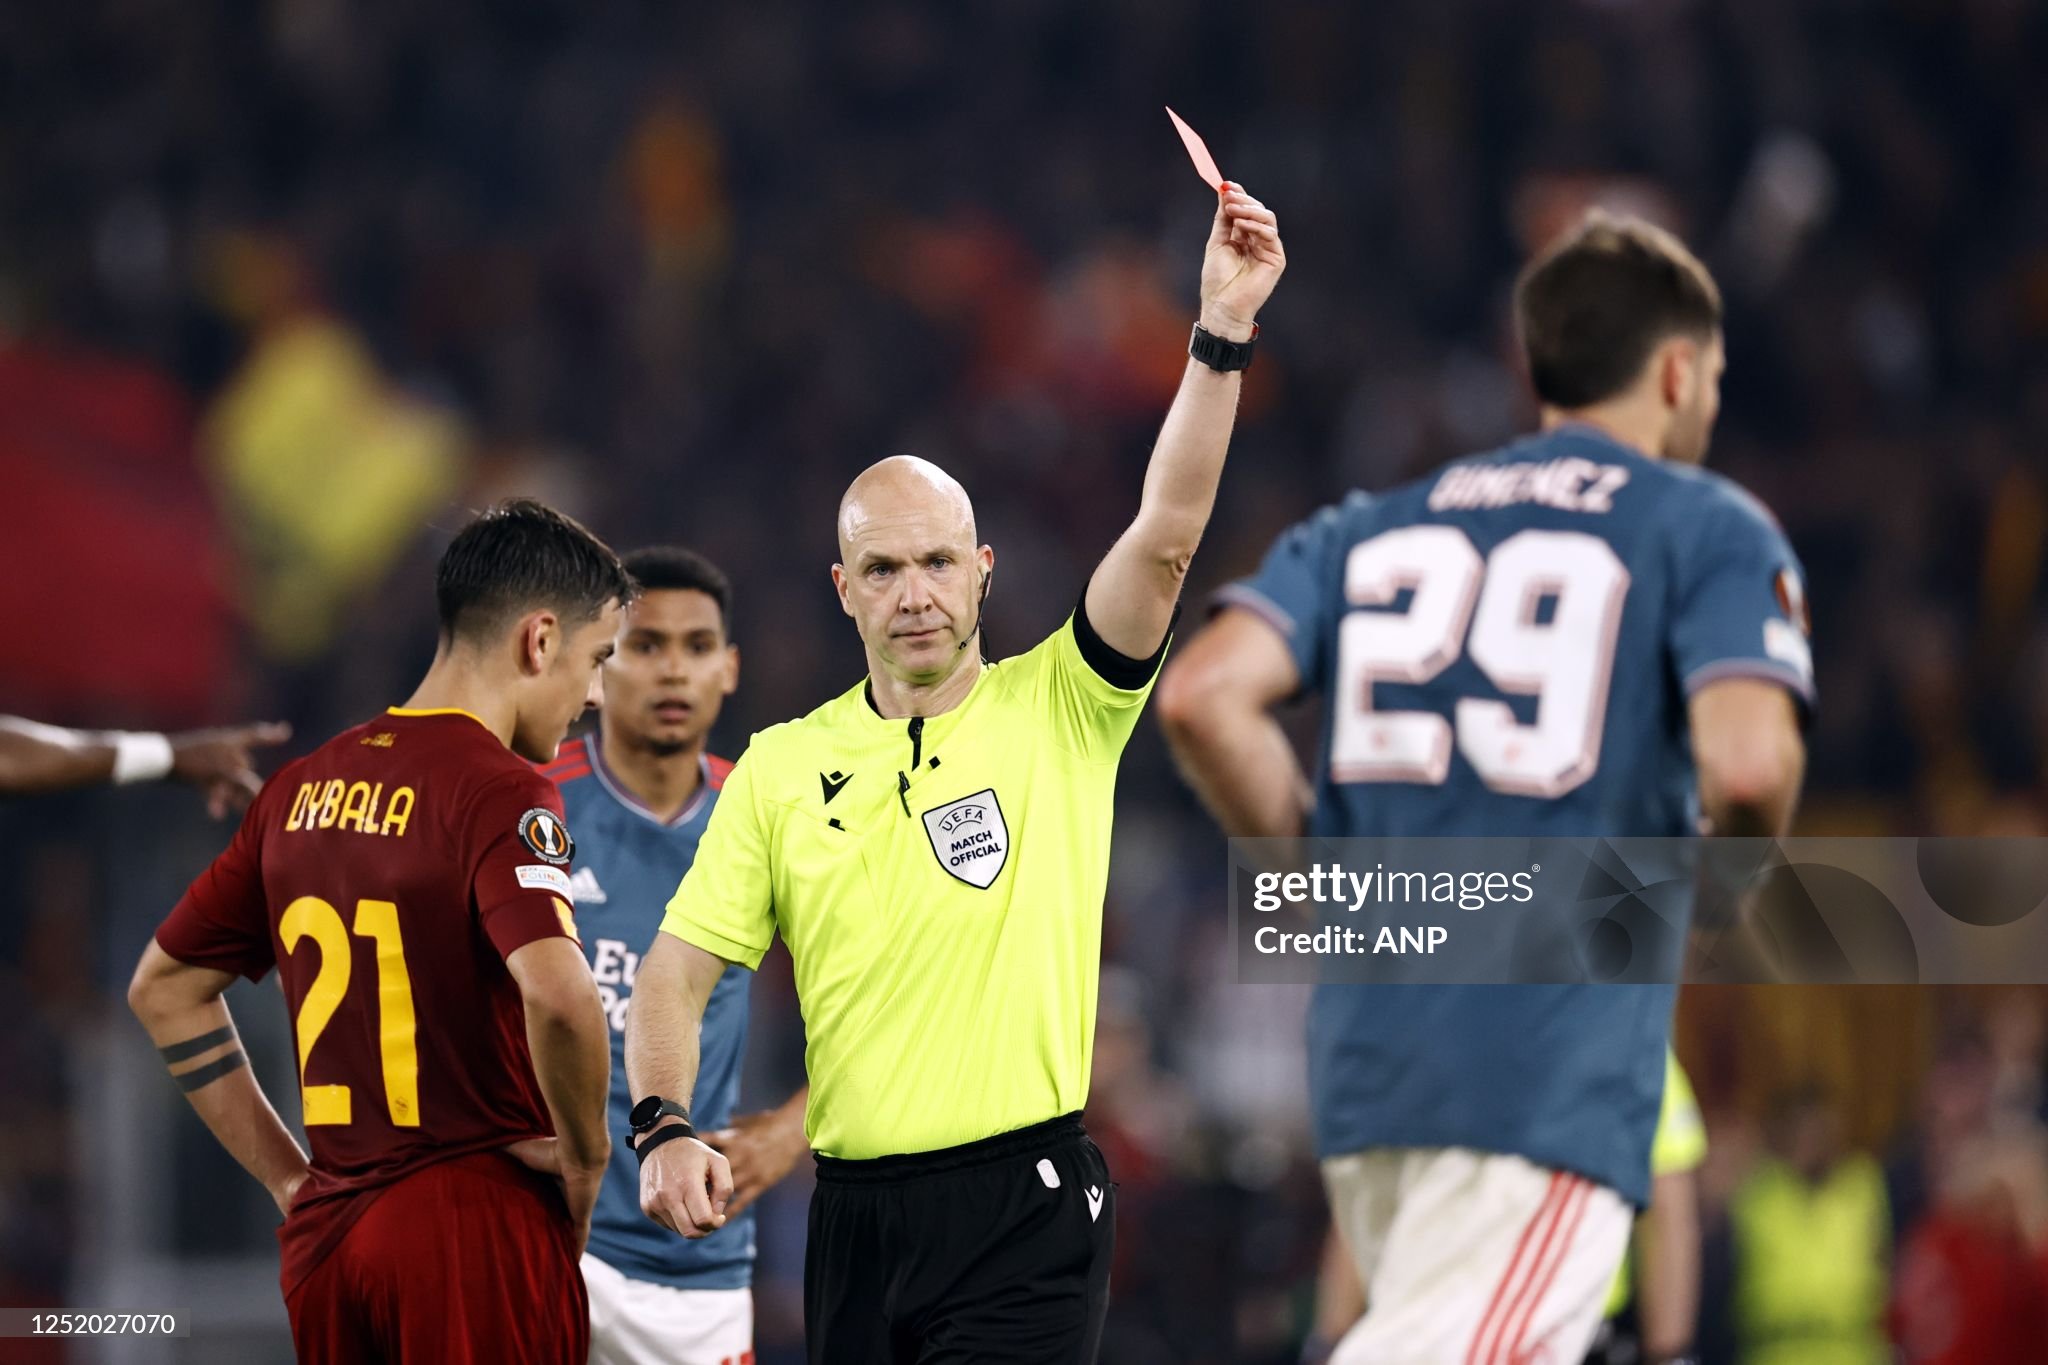 Referee who gave Giménez a red card to officiate Feyenoord again